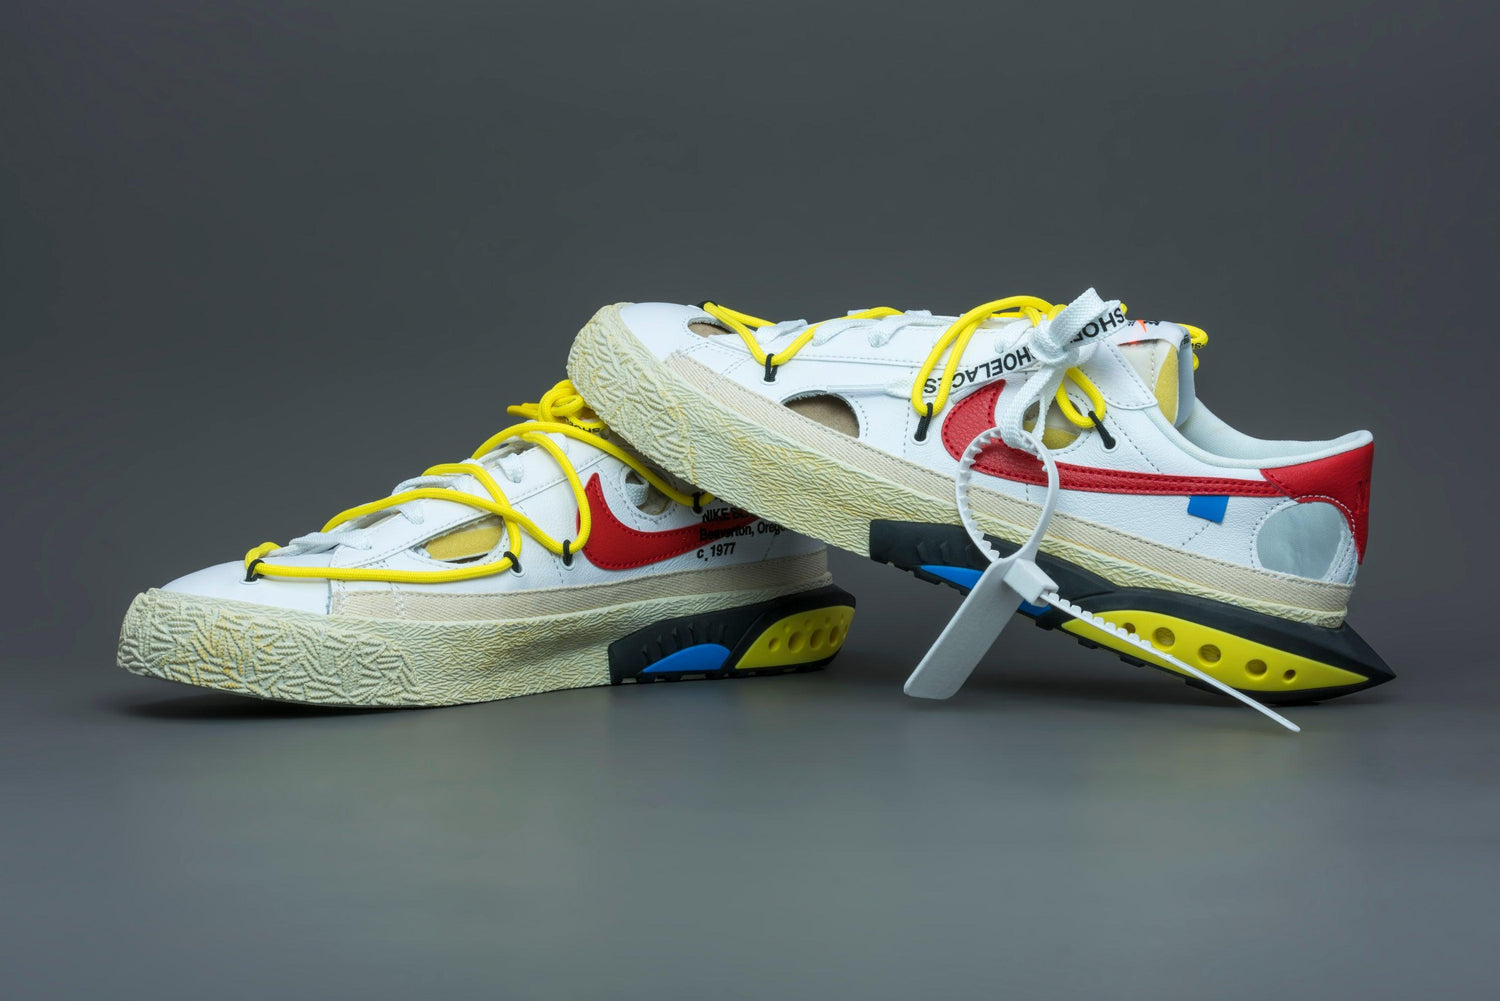 OFF-WHITE x Nike Blazer Low DH7863-100 Release Date